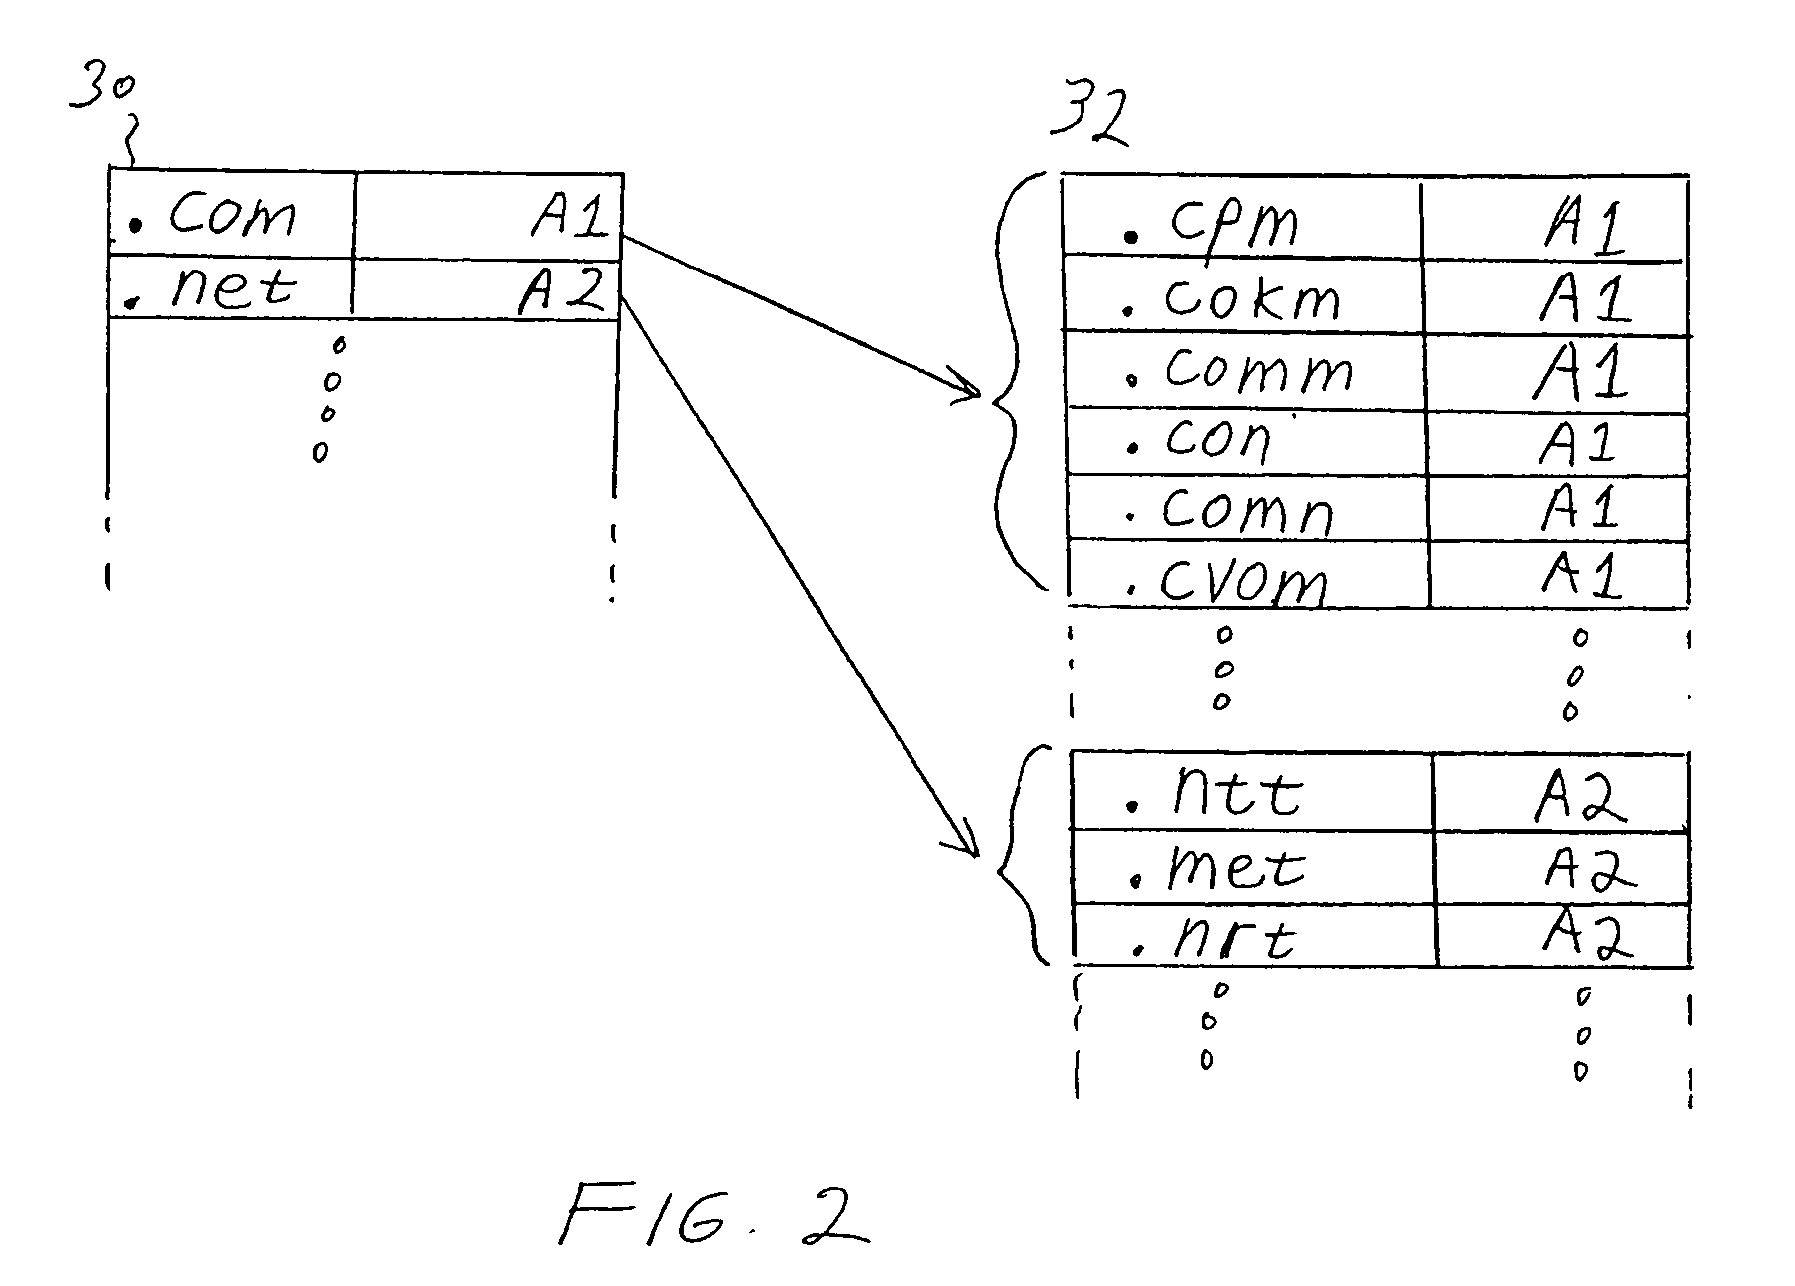 Generic top-level domain re-routing system